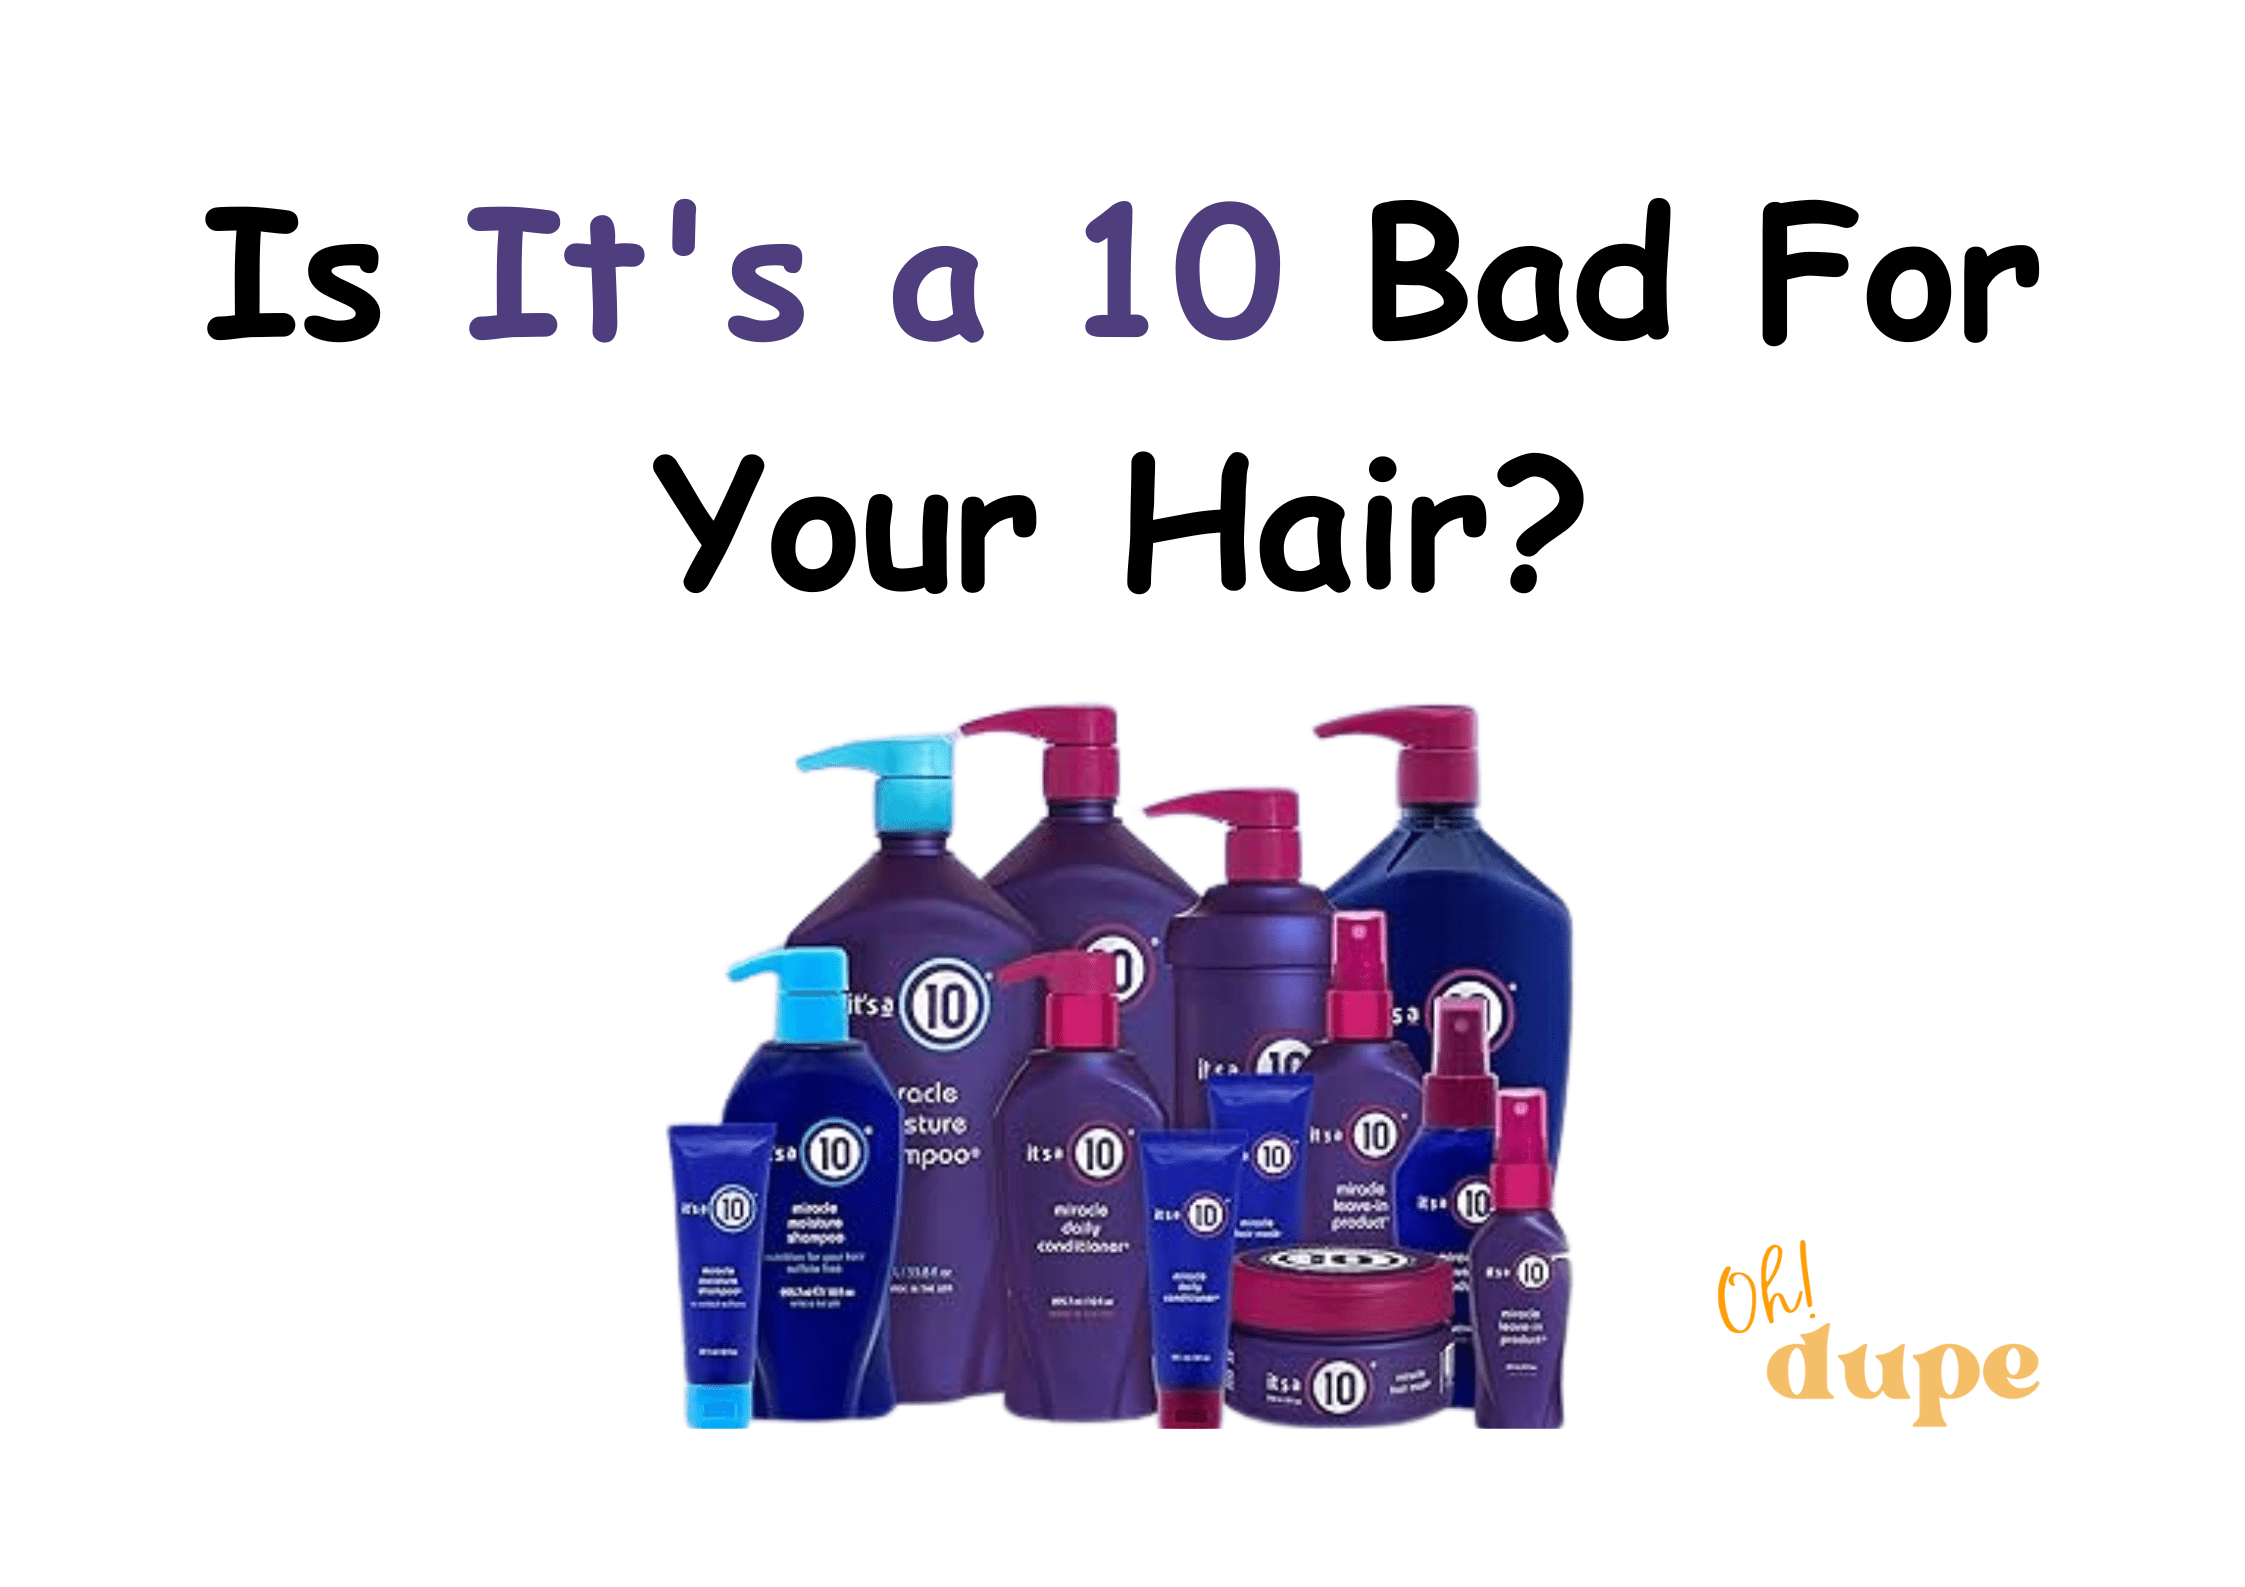 Is It's a 10 Bad For Your Hair?